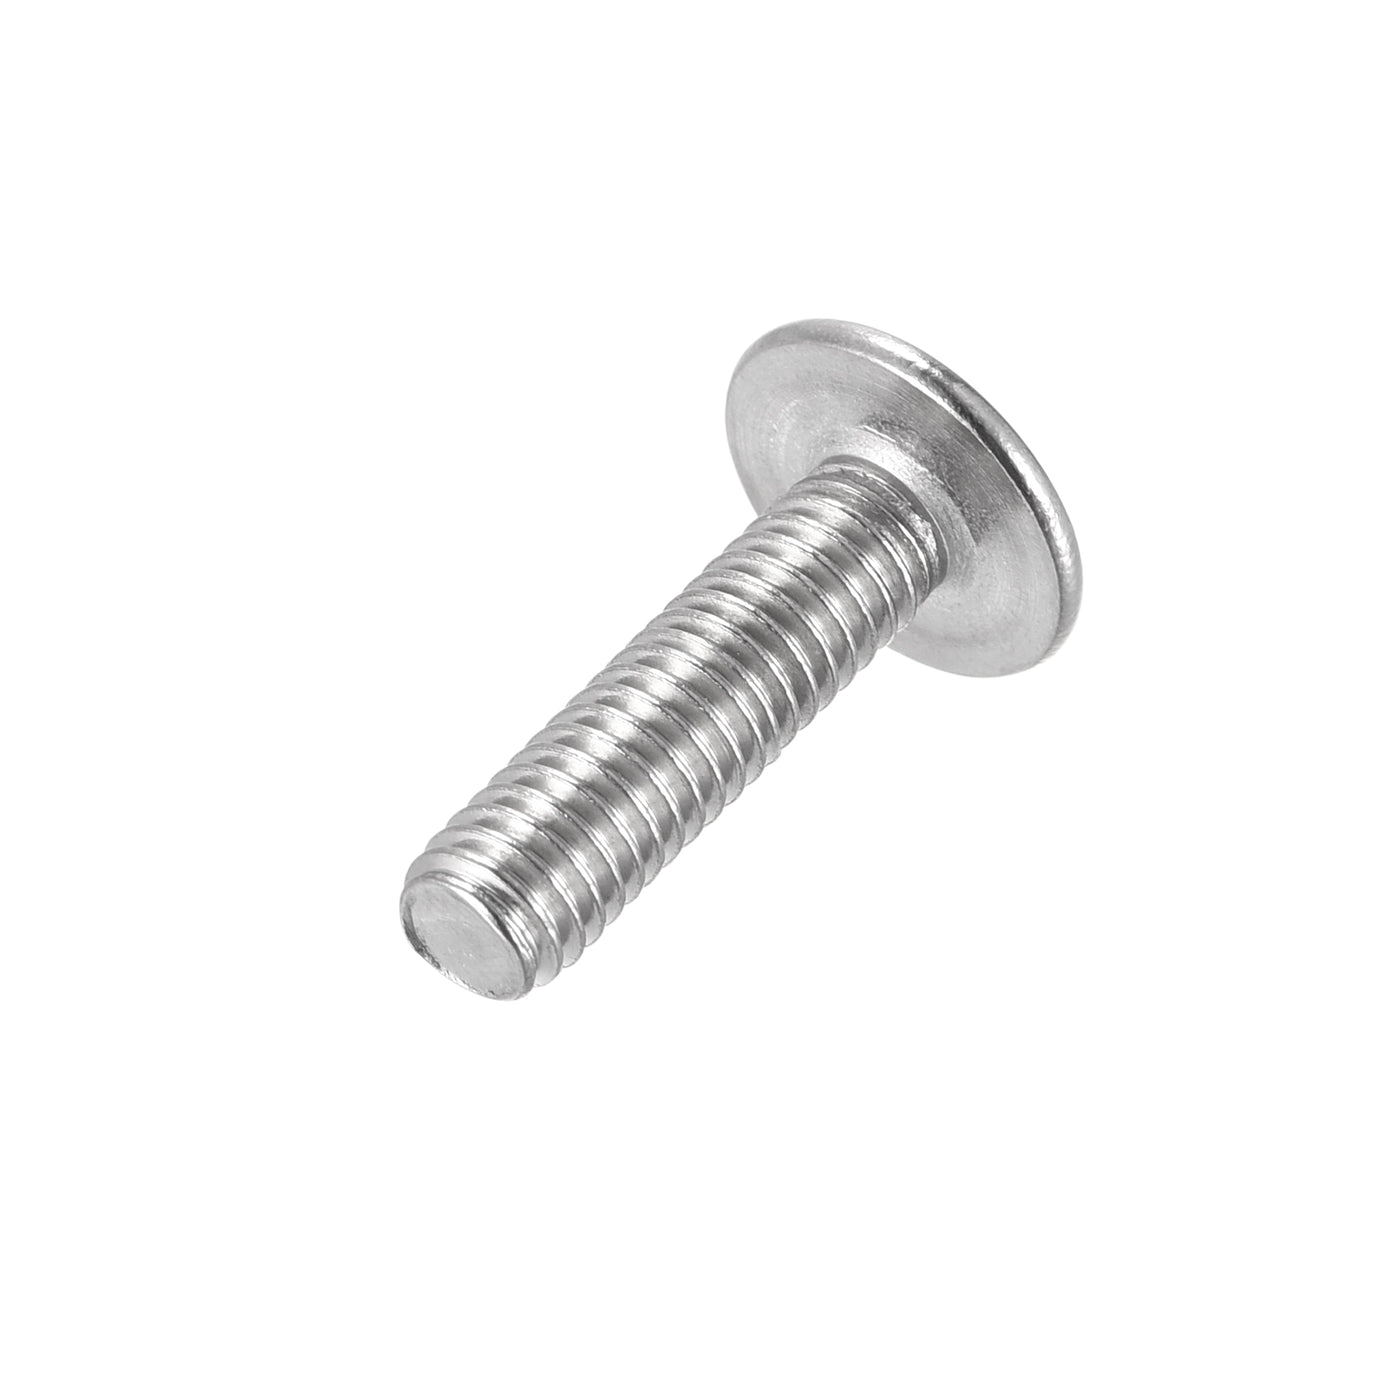 Uxcell Uxcell M6x14mm 304 Stainless Steel Flanged Button Head Socket Cap Screws 20pcs